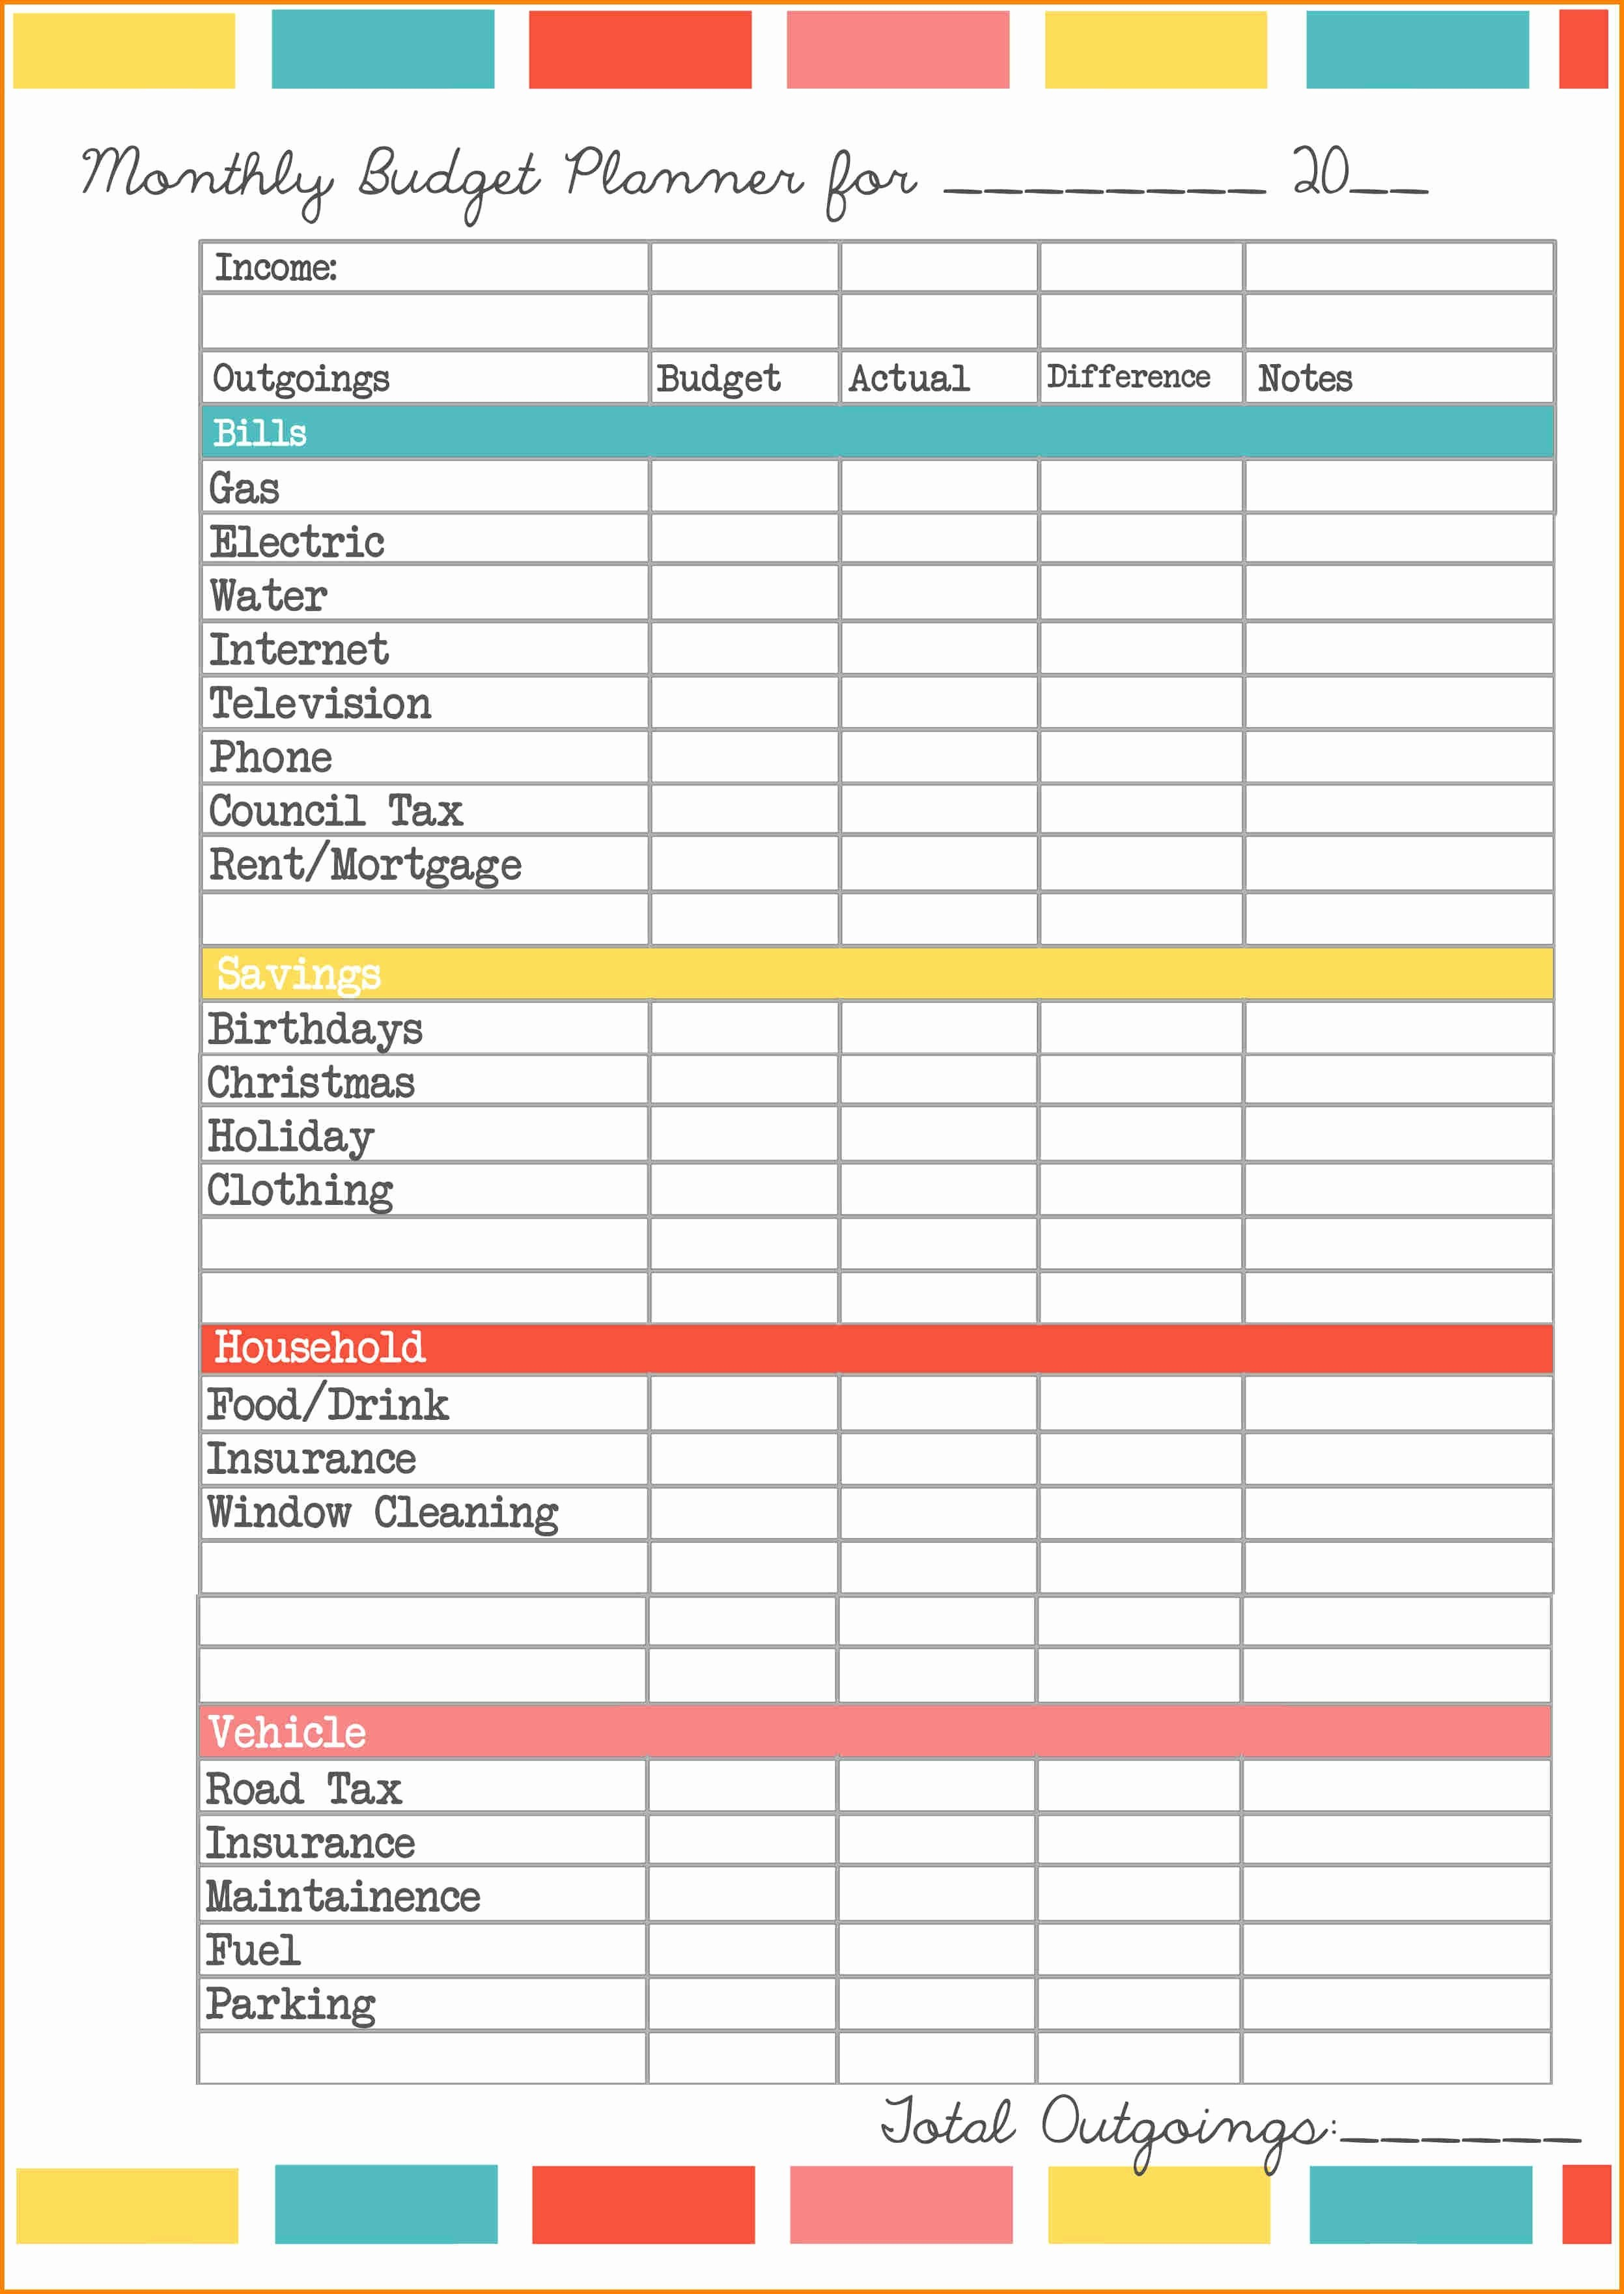 Expense Spreadsheet Template Free Report Personal Finance Excel Farm intended for Excel Spreadsheet Template For Small Business